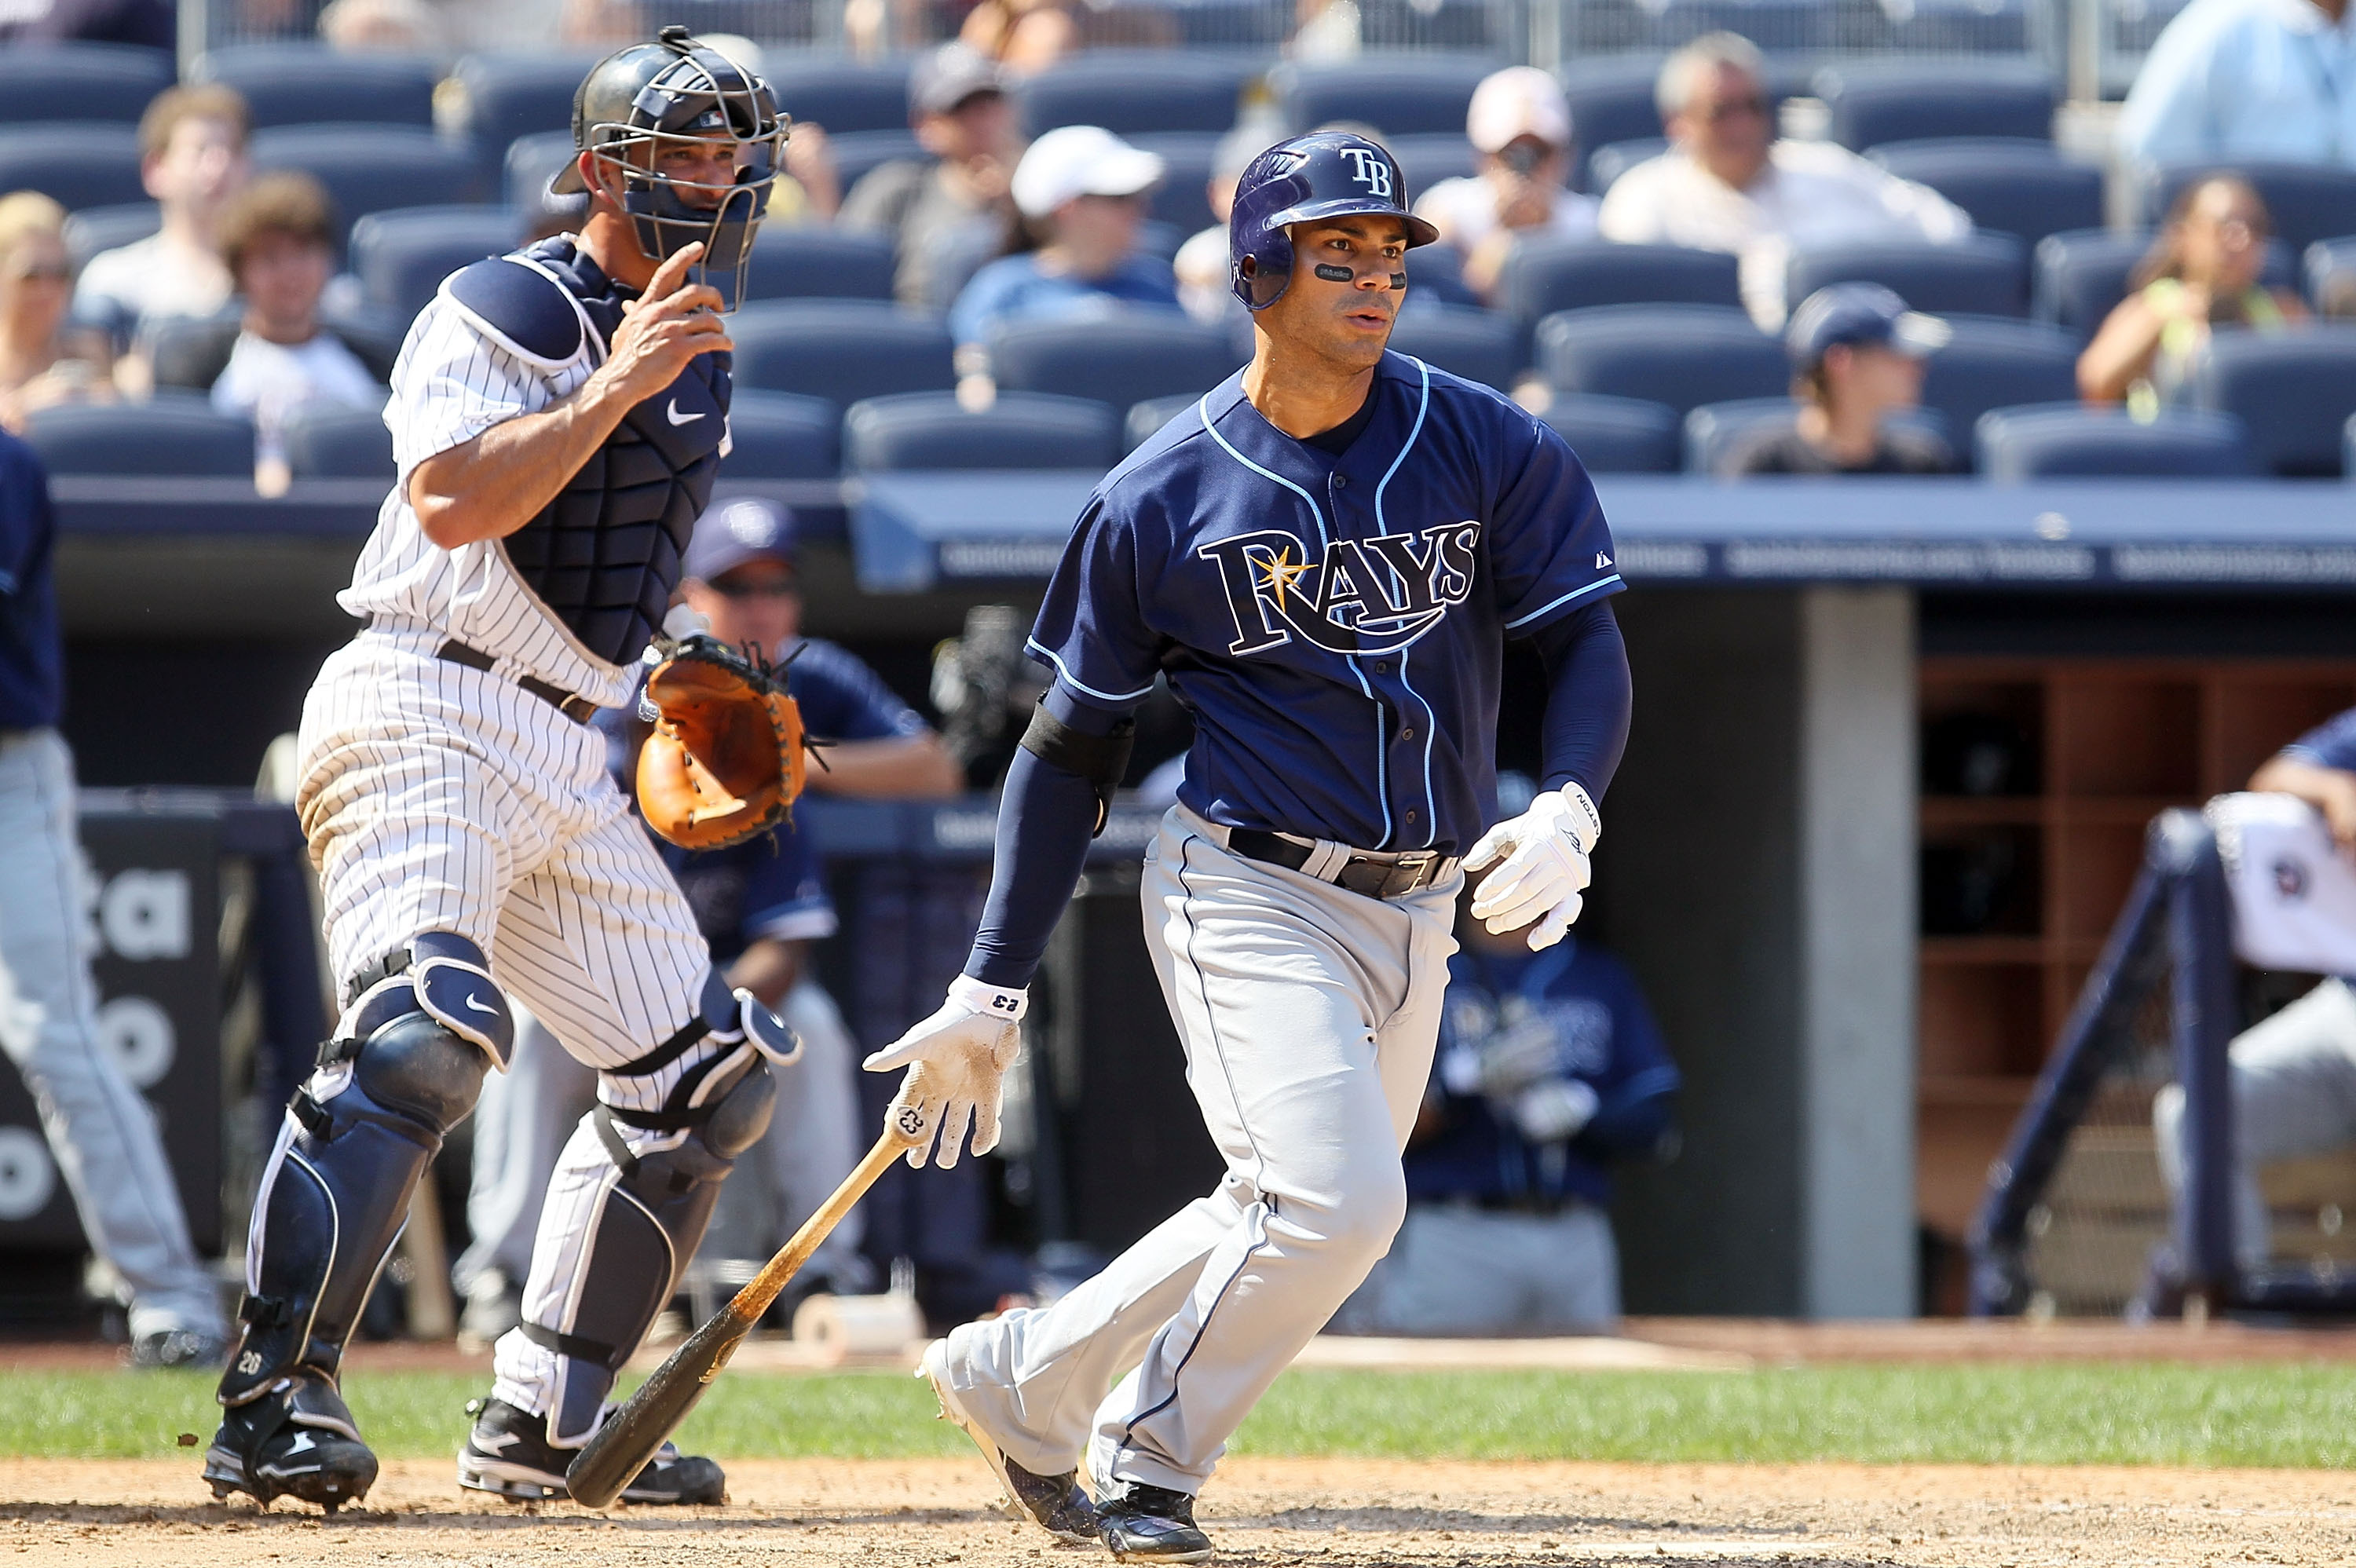 Carlos Pena is the fourth best position player in Tampa Bay Rays history